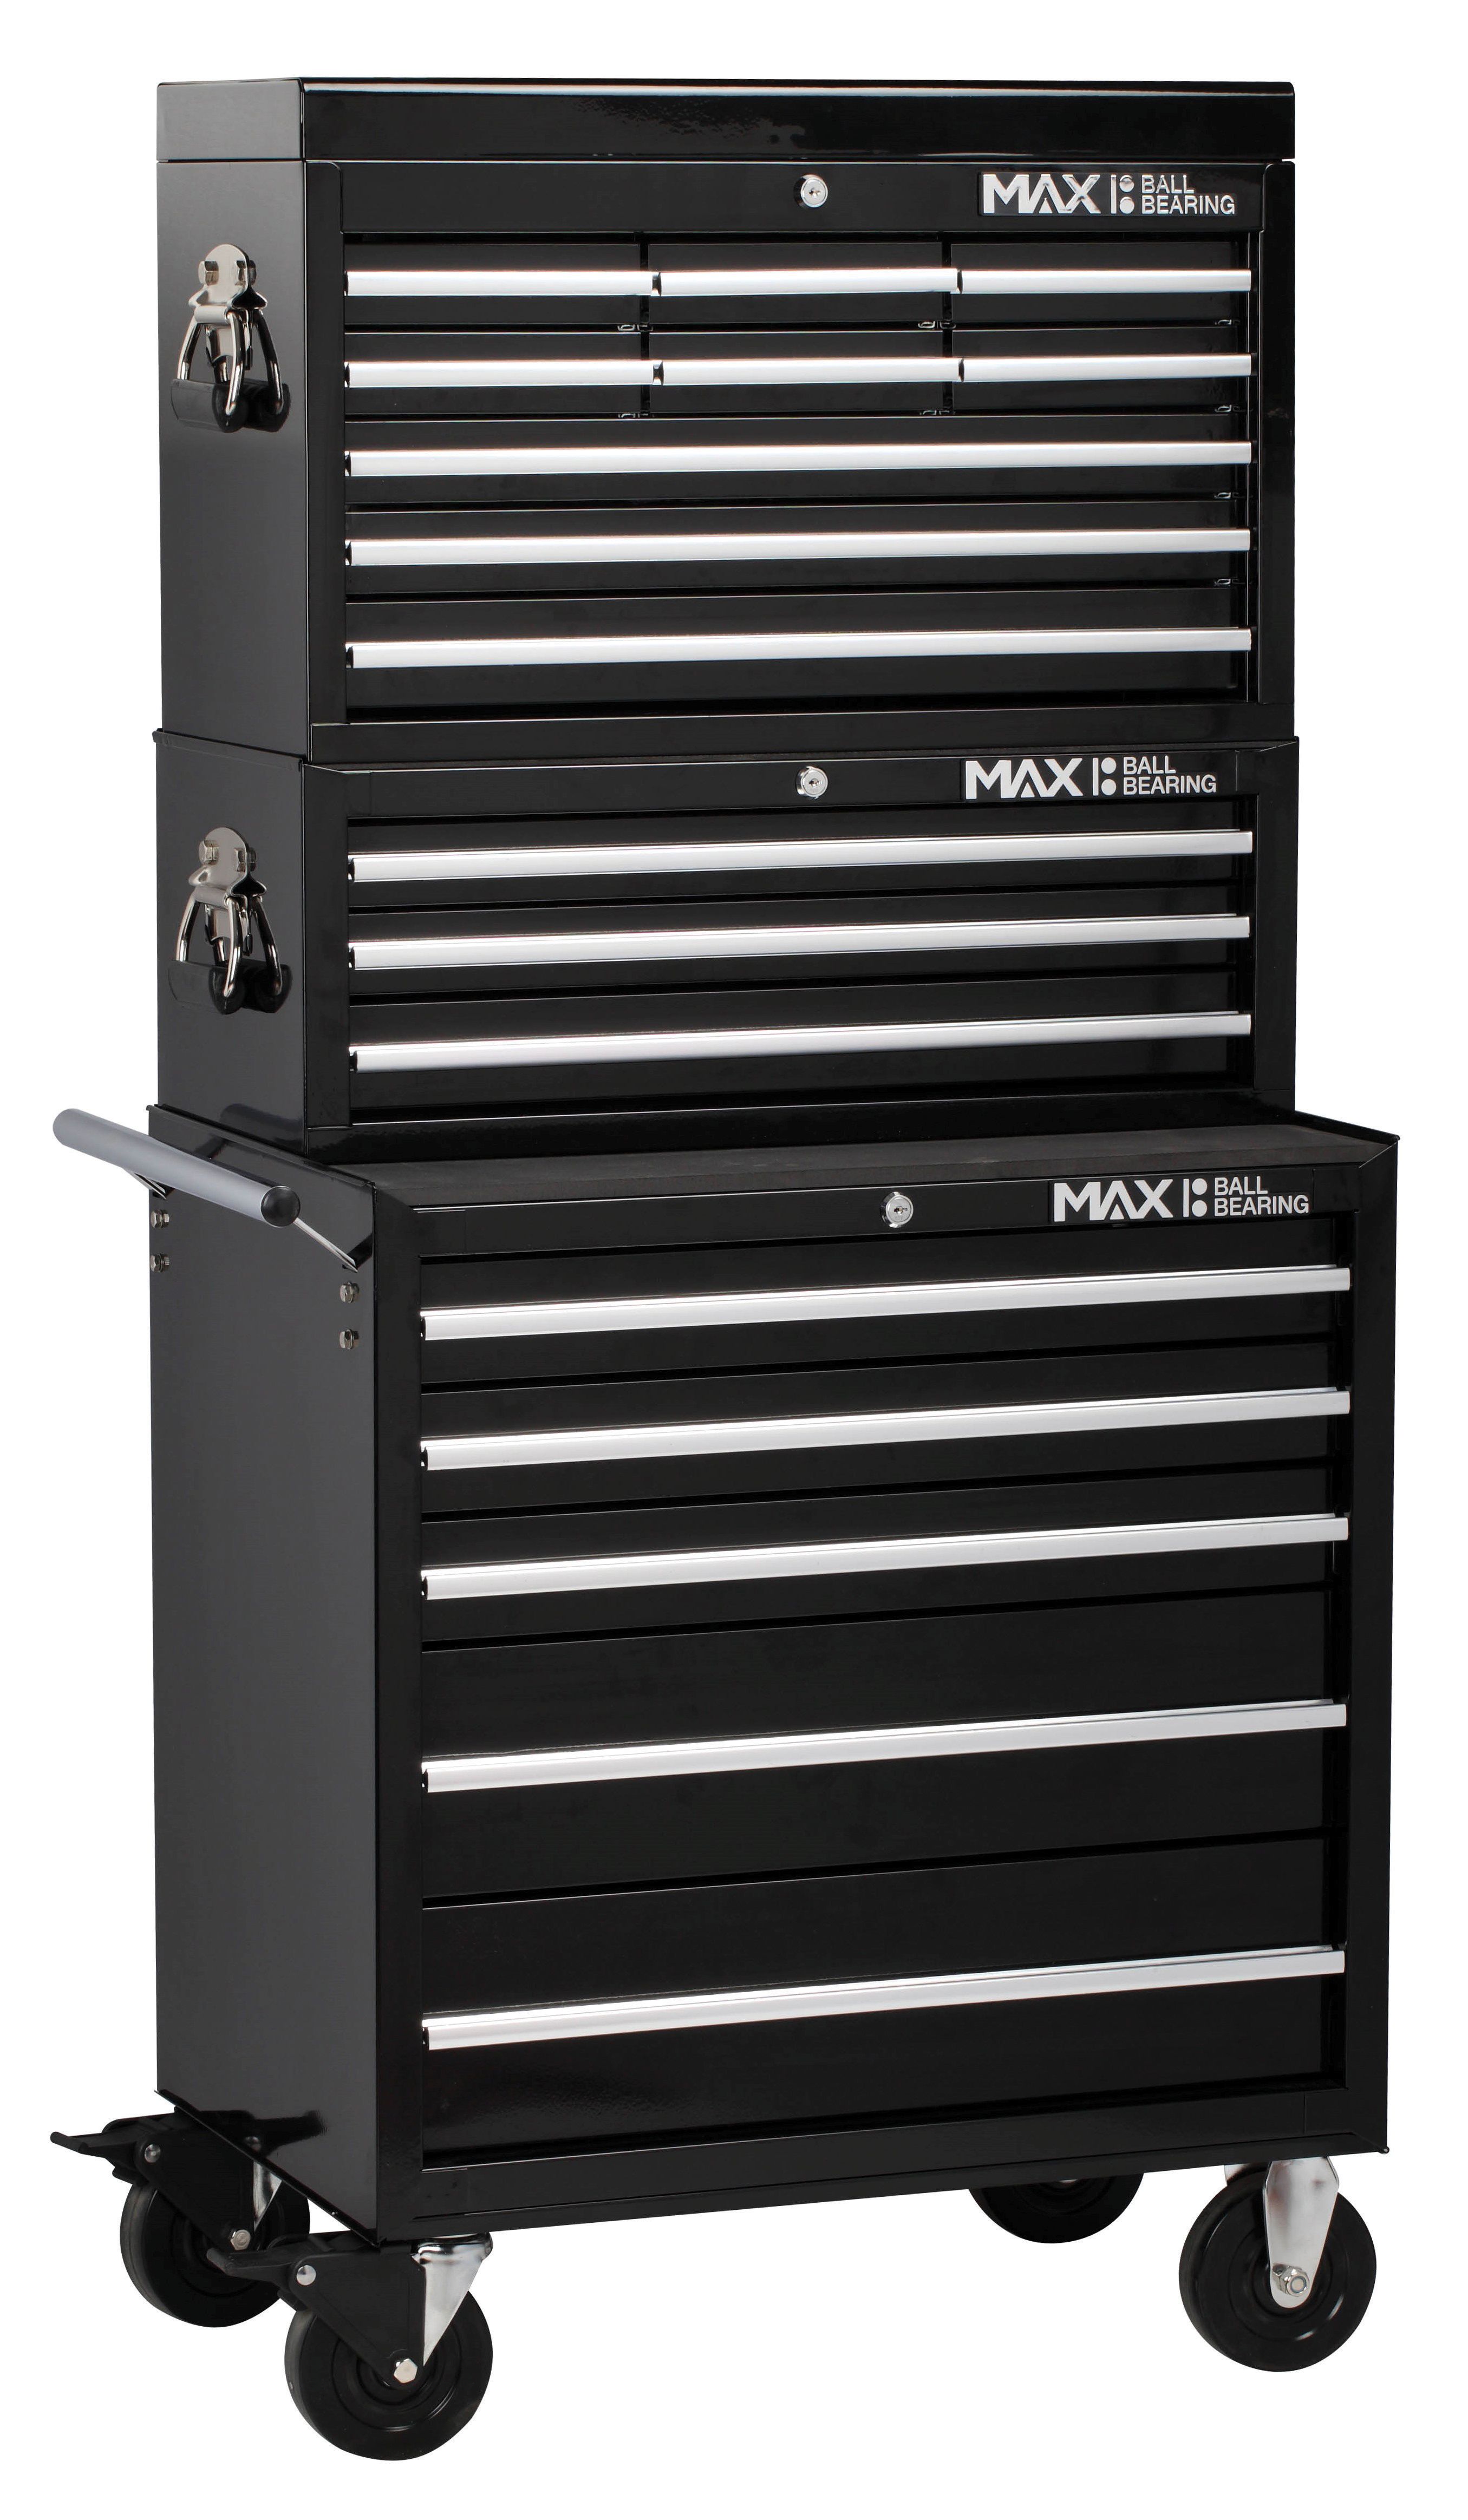 Hilka Professional 17 Drawer Tool Chest and Trolley Combination Unit - Black